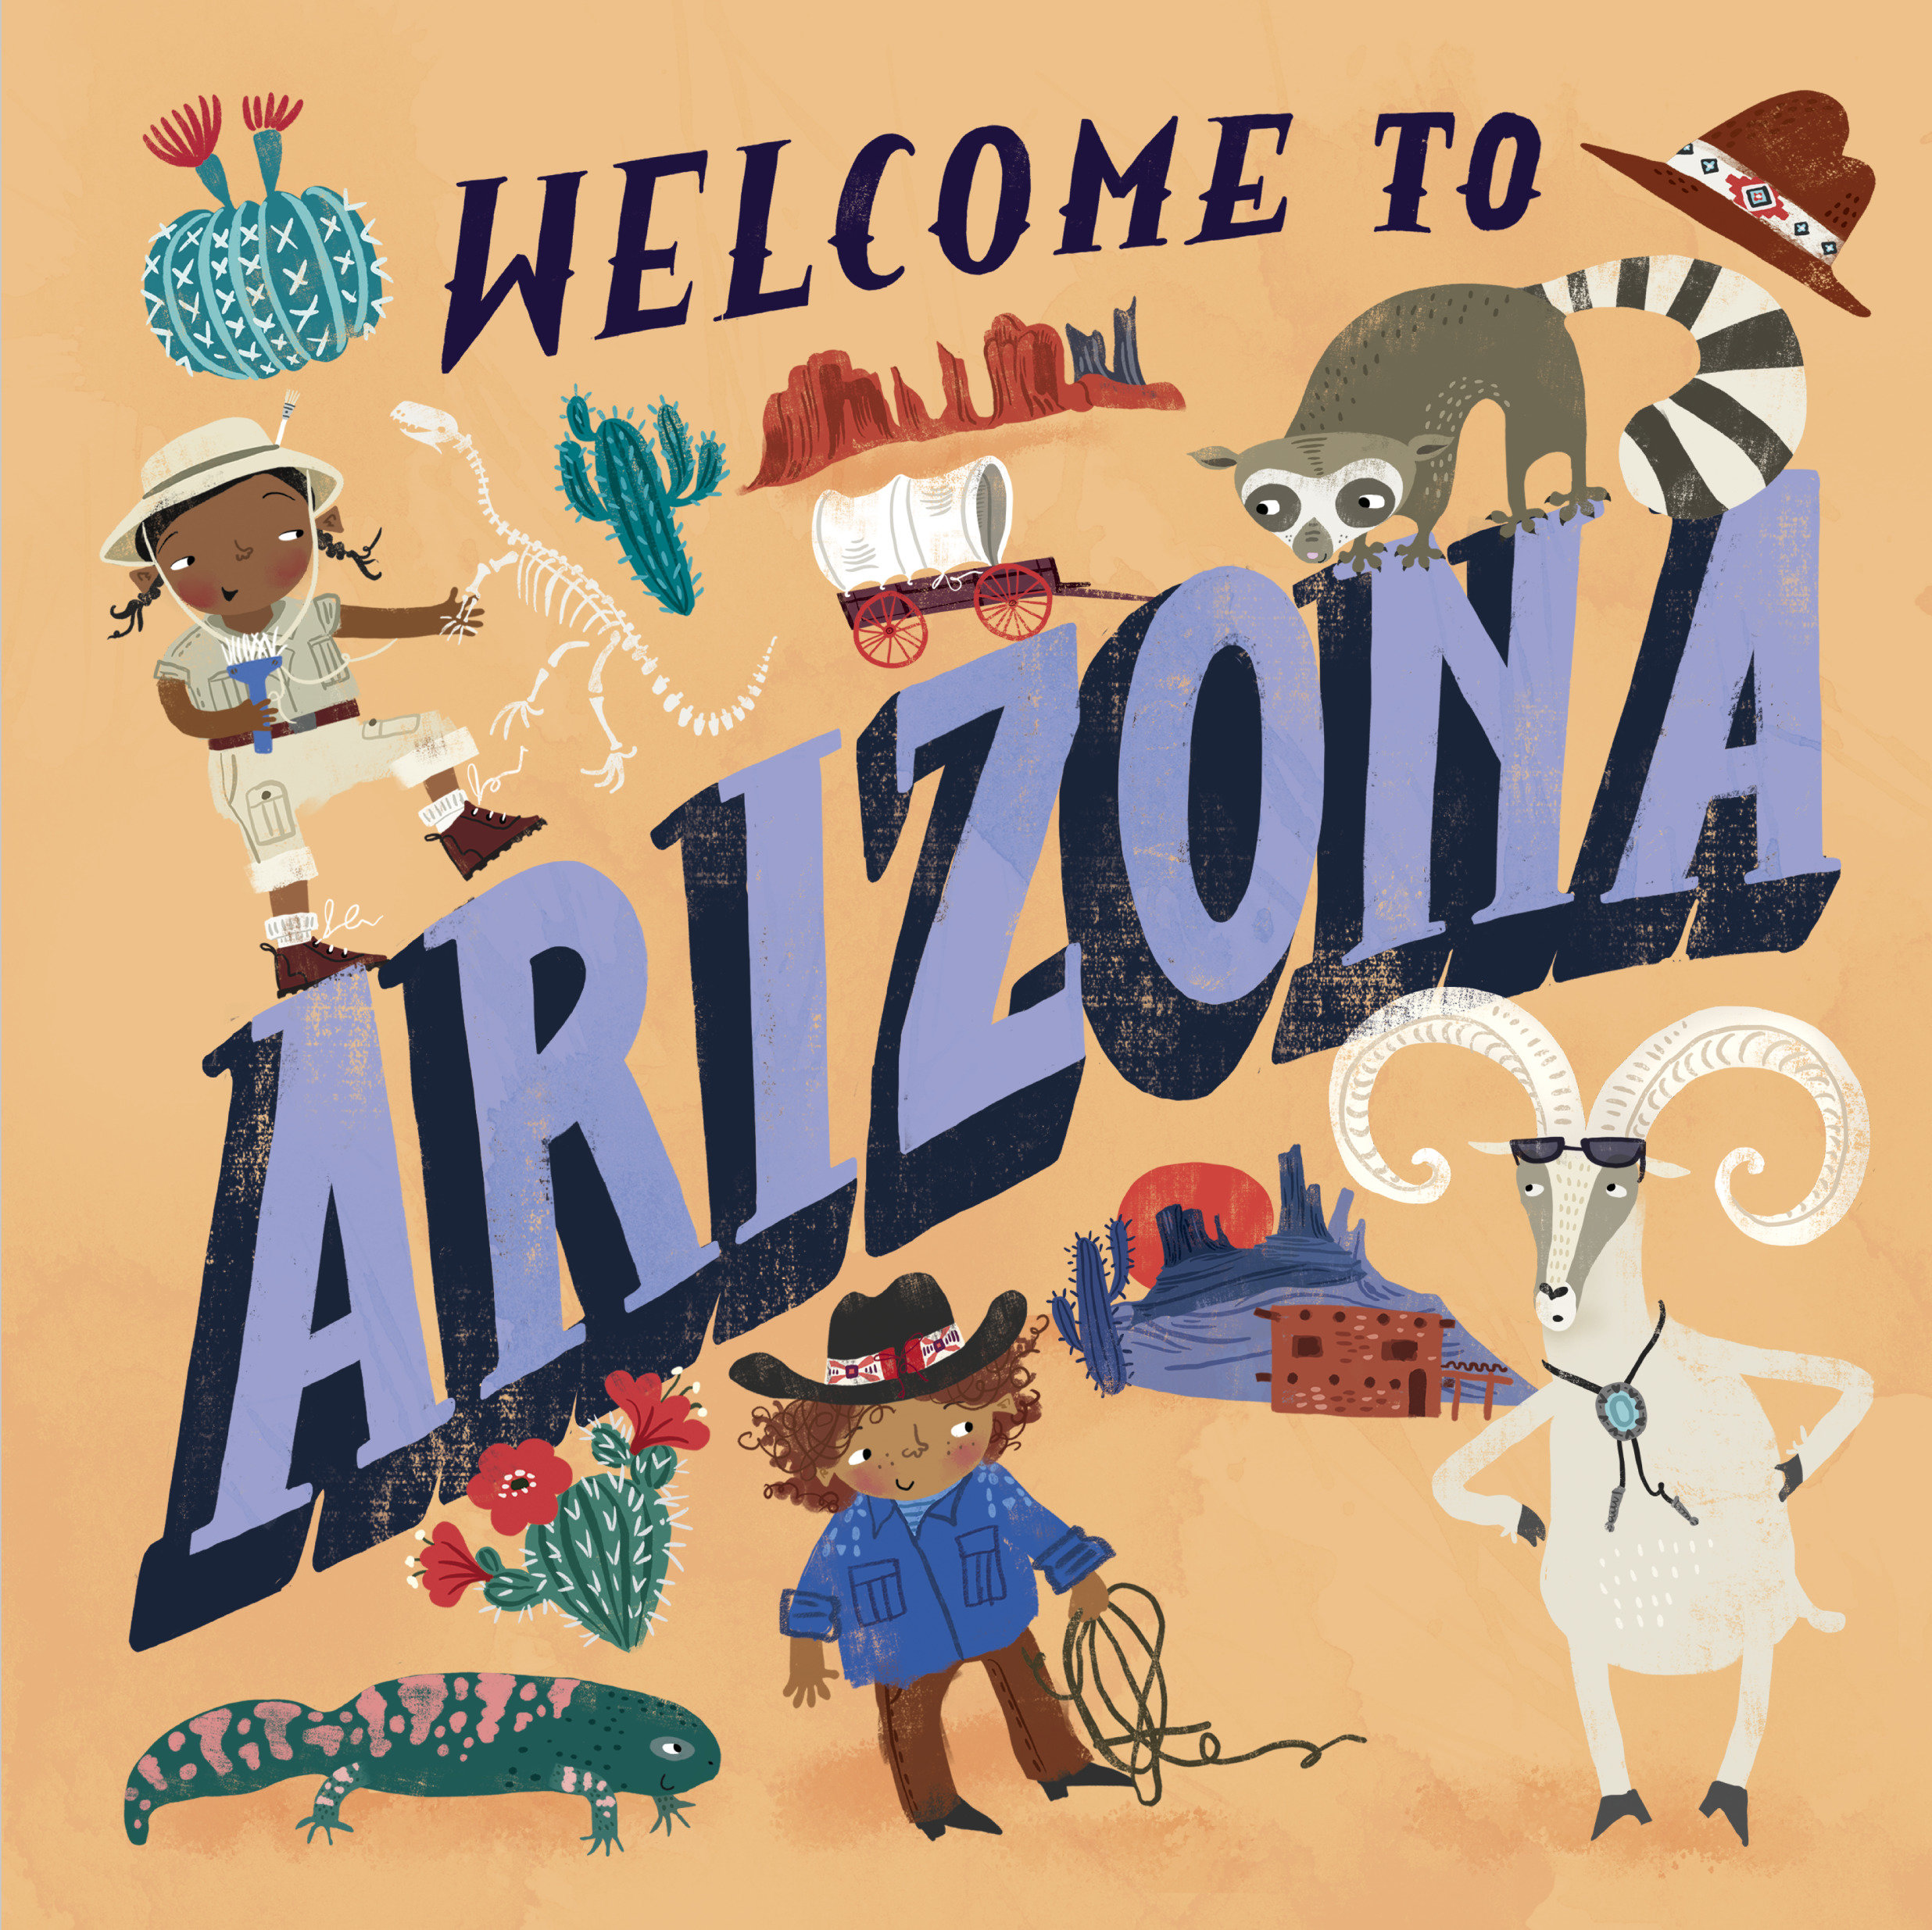 Welcome To Arizona (Welcome To) (Hardcover Book)